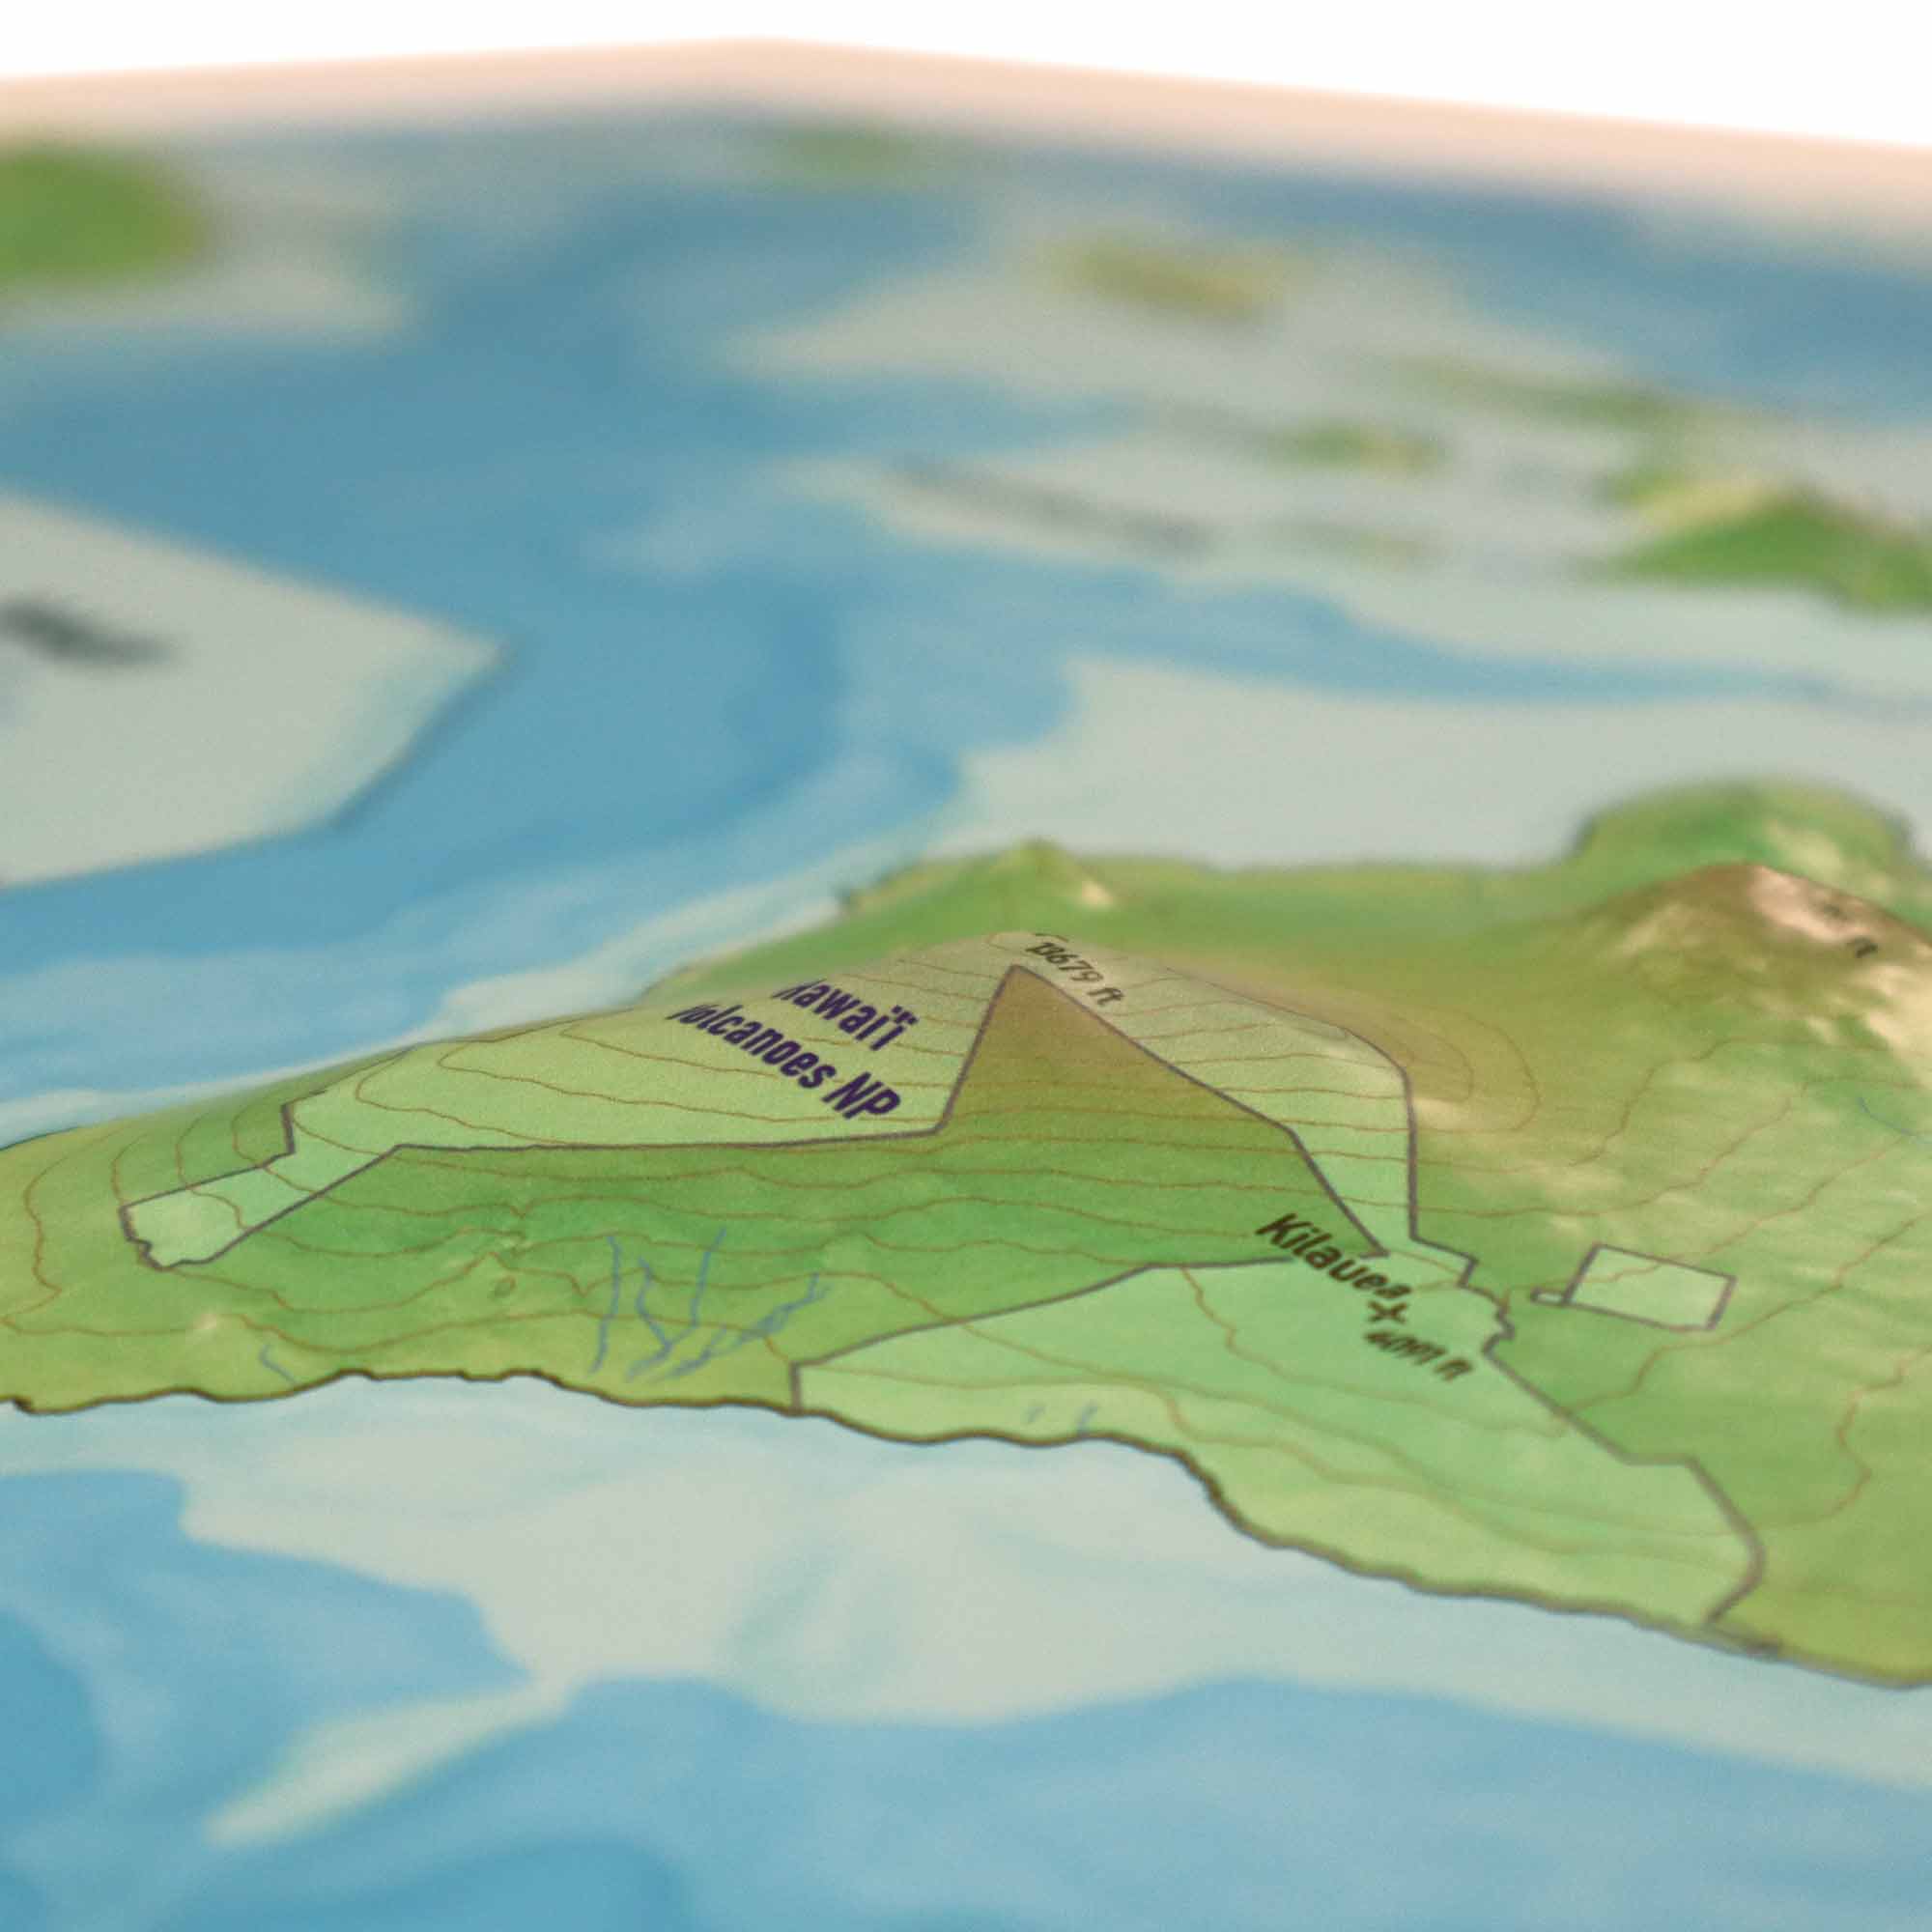 Hawaii Raised Relief 3D Map showcasing detailed topography with lush valleys, volcanic peaks, and rugged coastlines, perfect for educators, adventurers, and geography enthusiasts interested in Hawaii's natural beauty and cultural heritage.